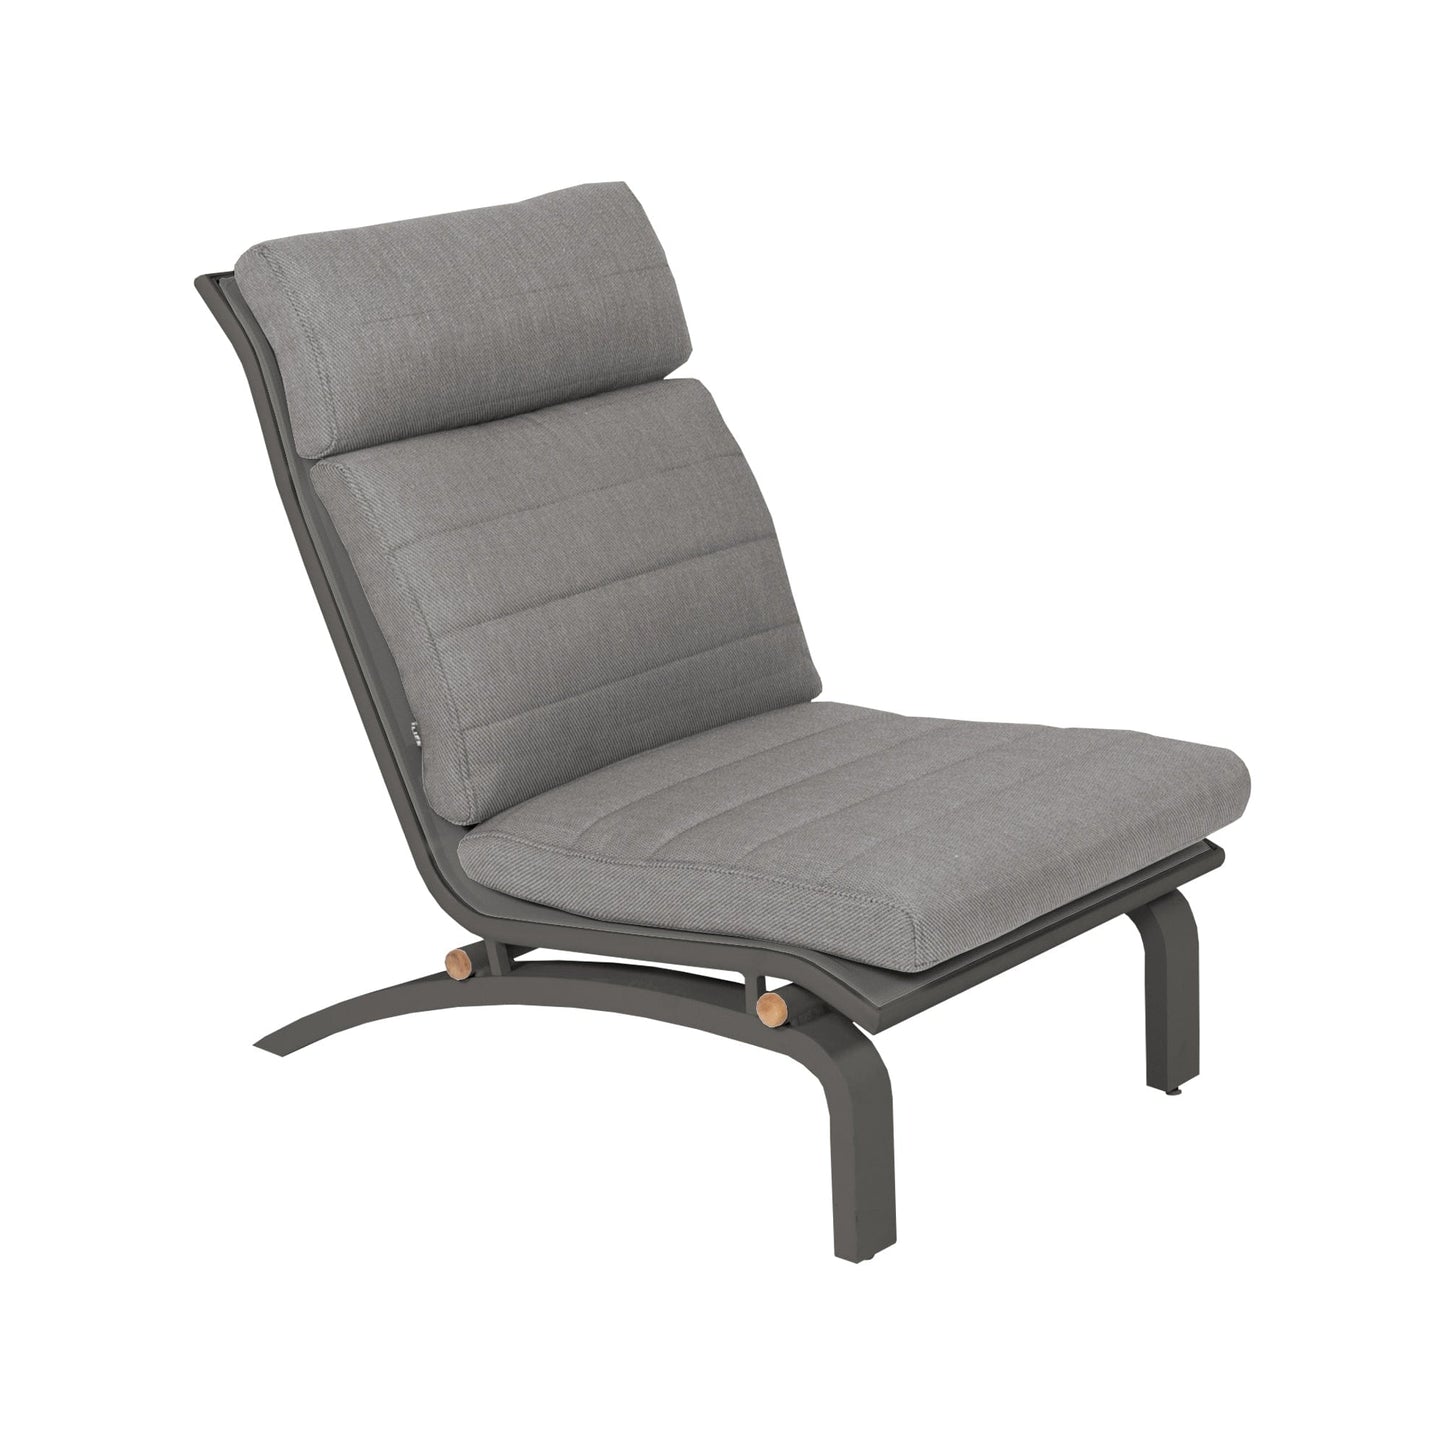 Felix Lounger, set includes two loungers